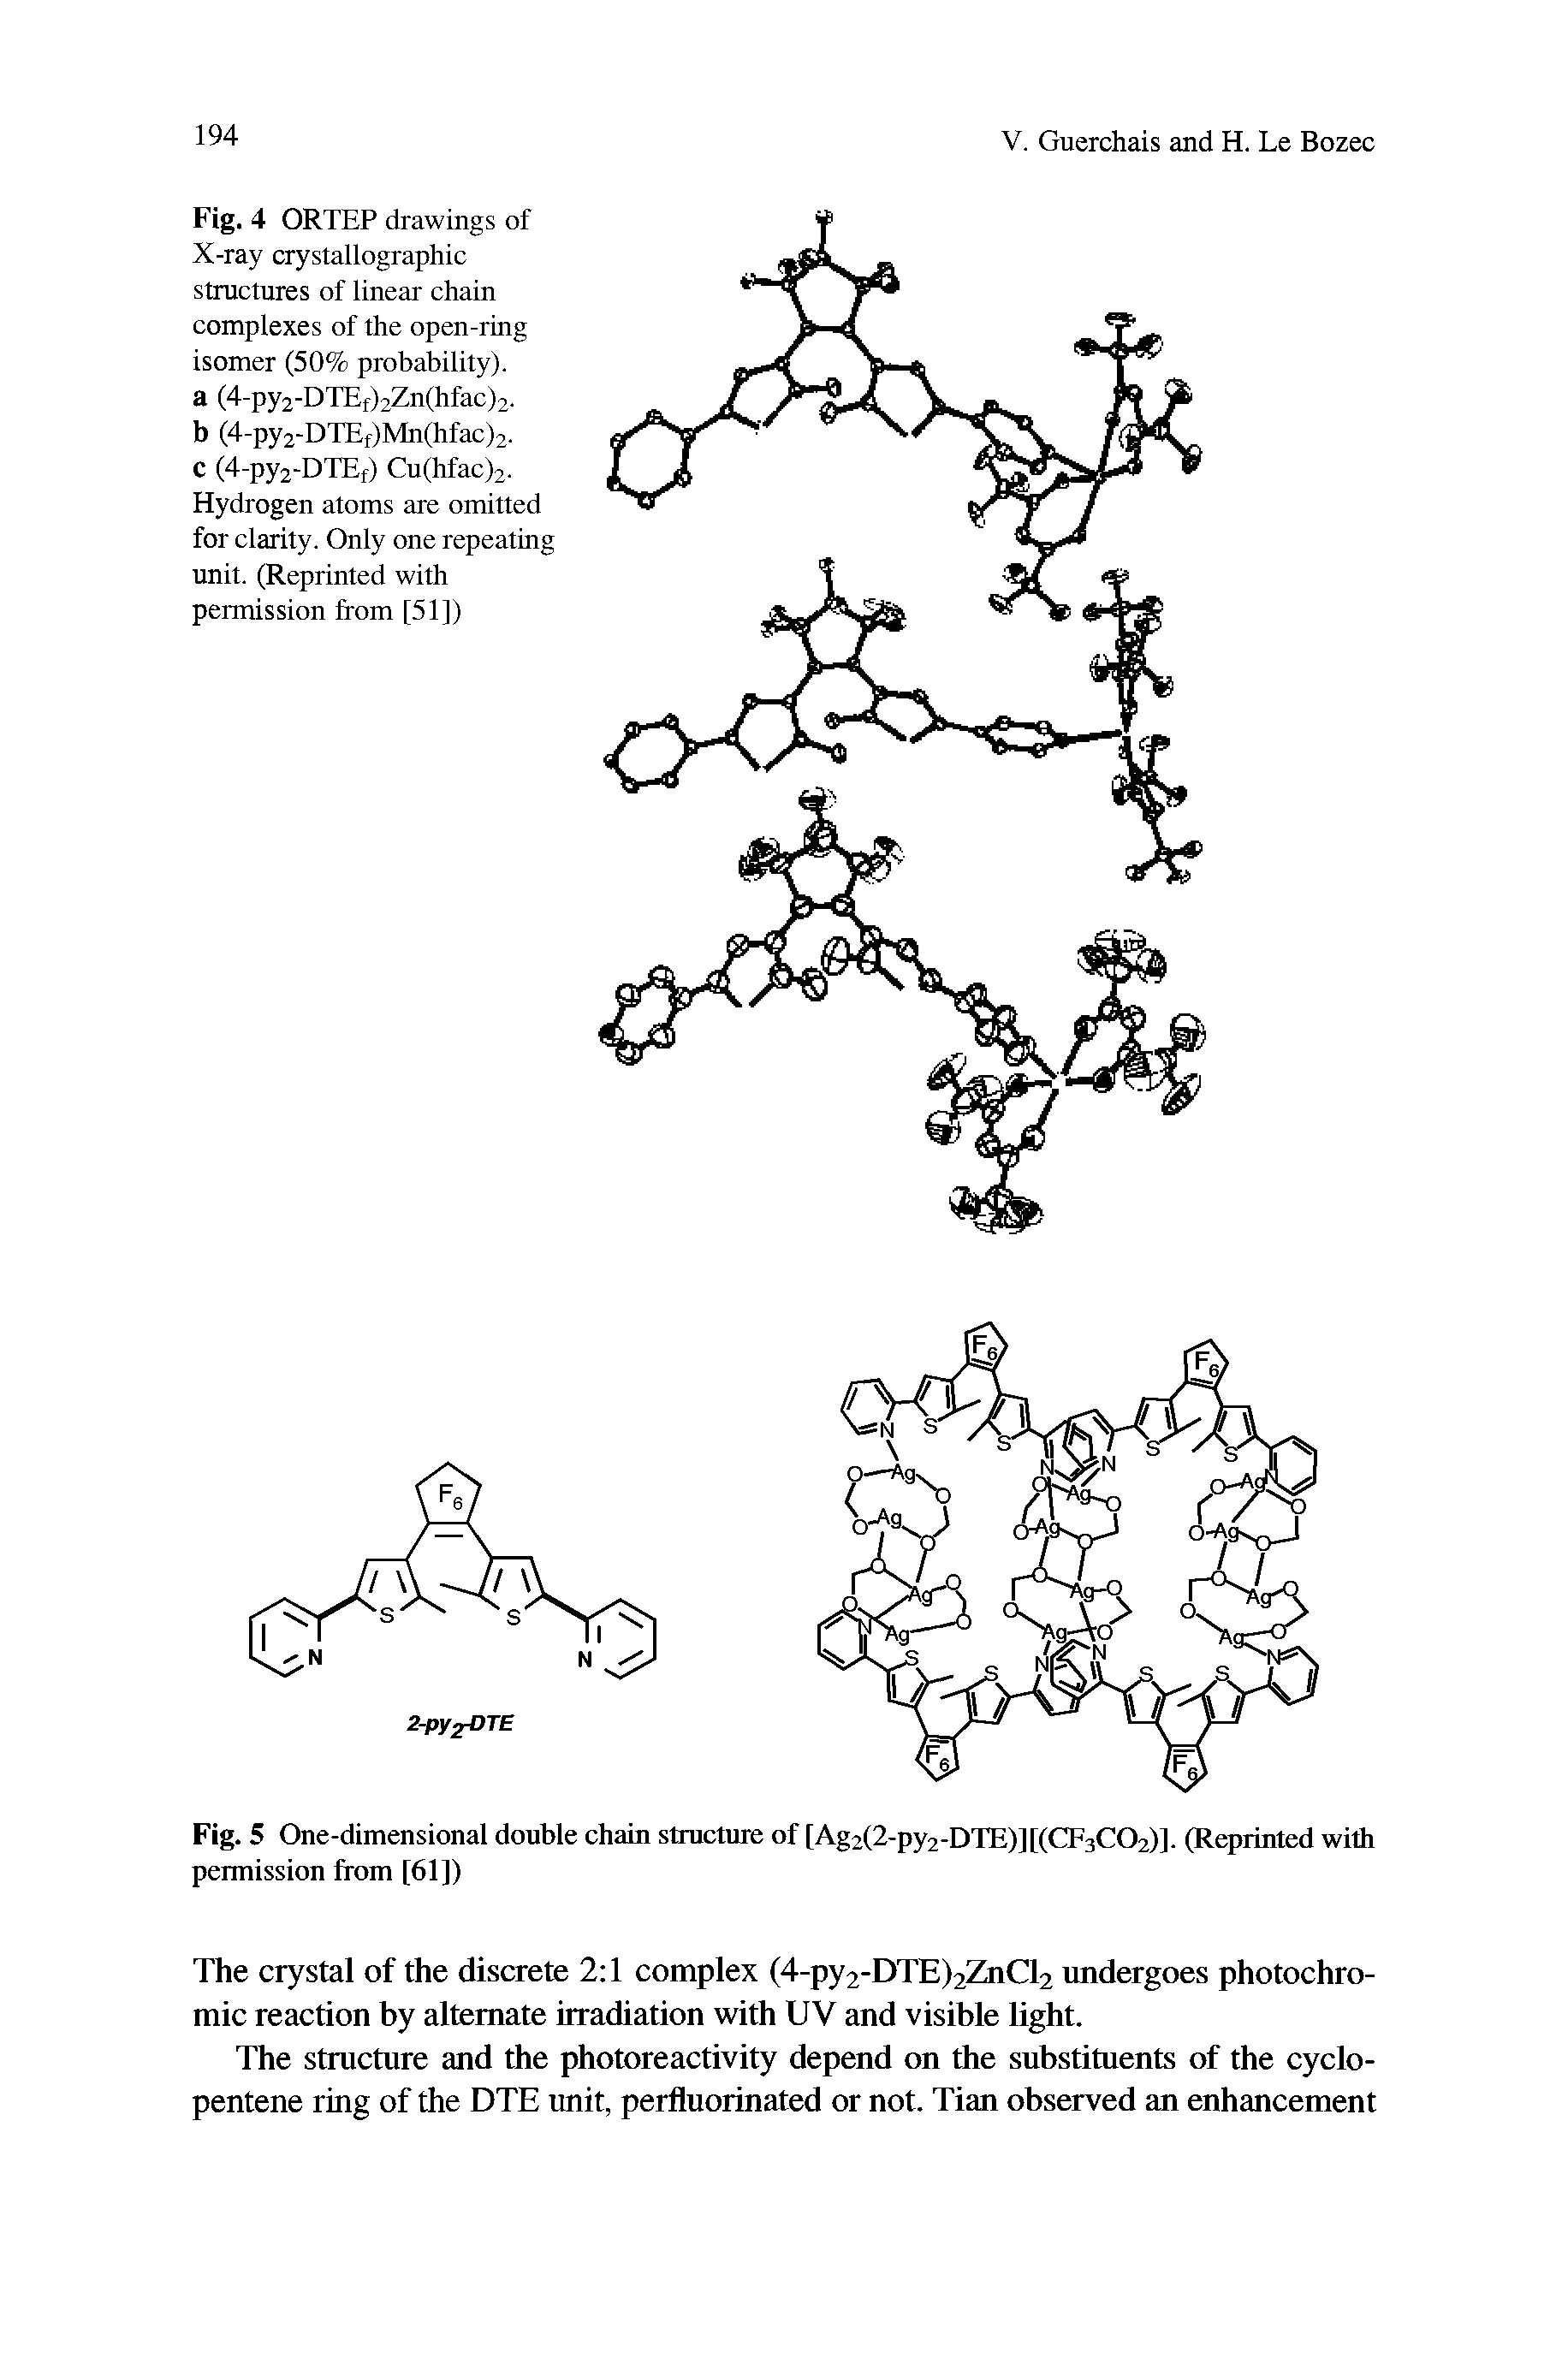 Fig. 4 ORTEP drawings of X-ray crystallographic structures of linear chain complexes of the open-ring isomer (50% probability), a (4-py2-DTEf)2Zn(hfac)2. b (4-py2-DTEf)Mn(hfac)2.